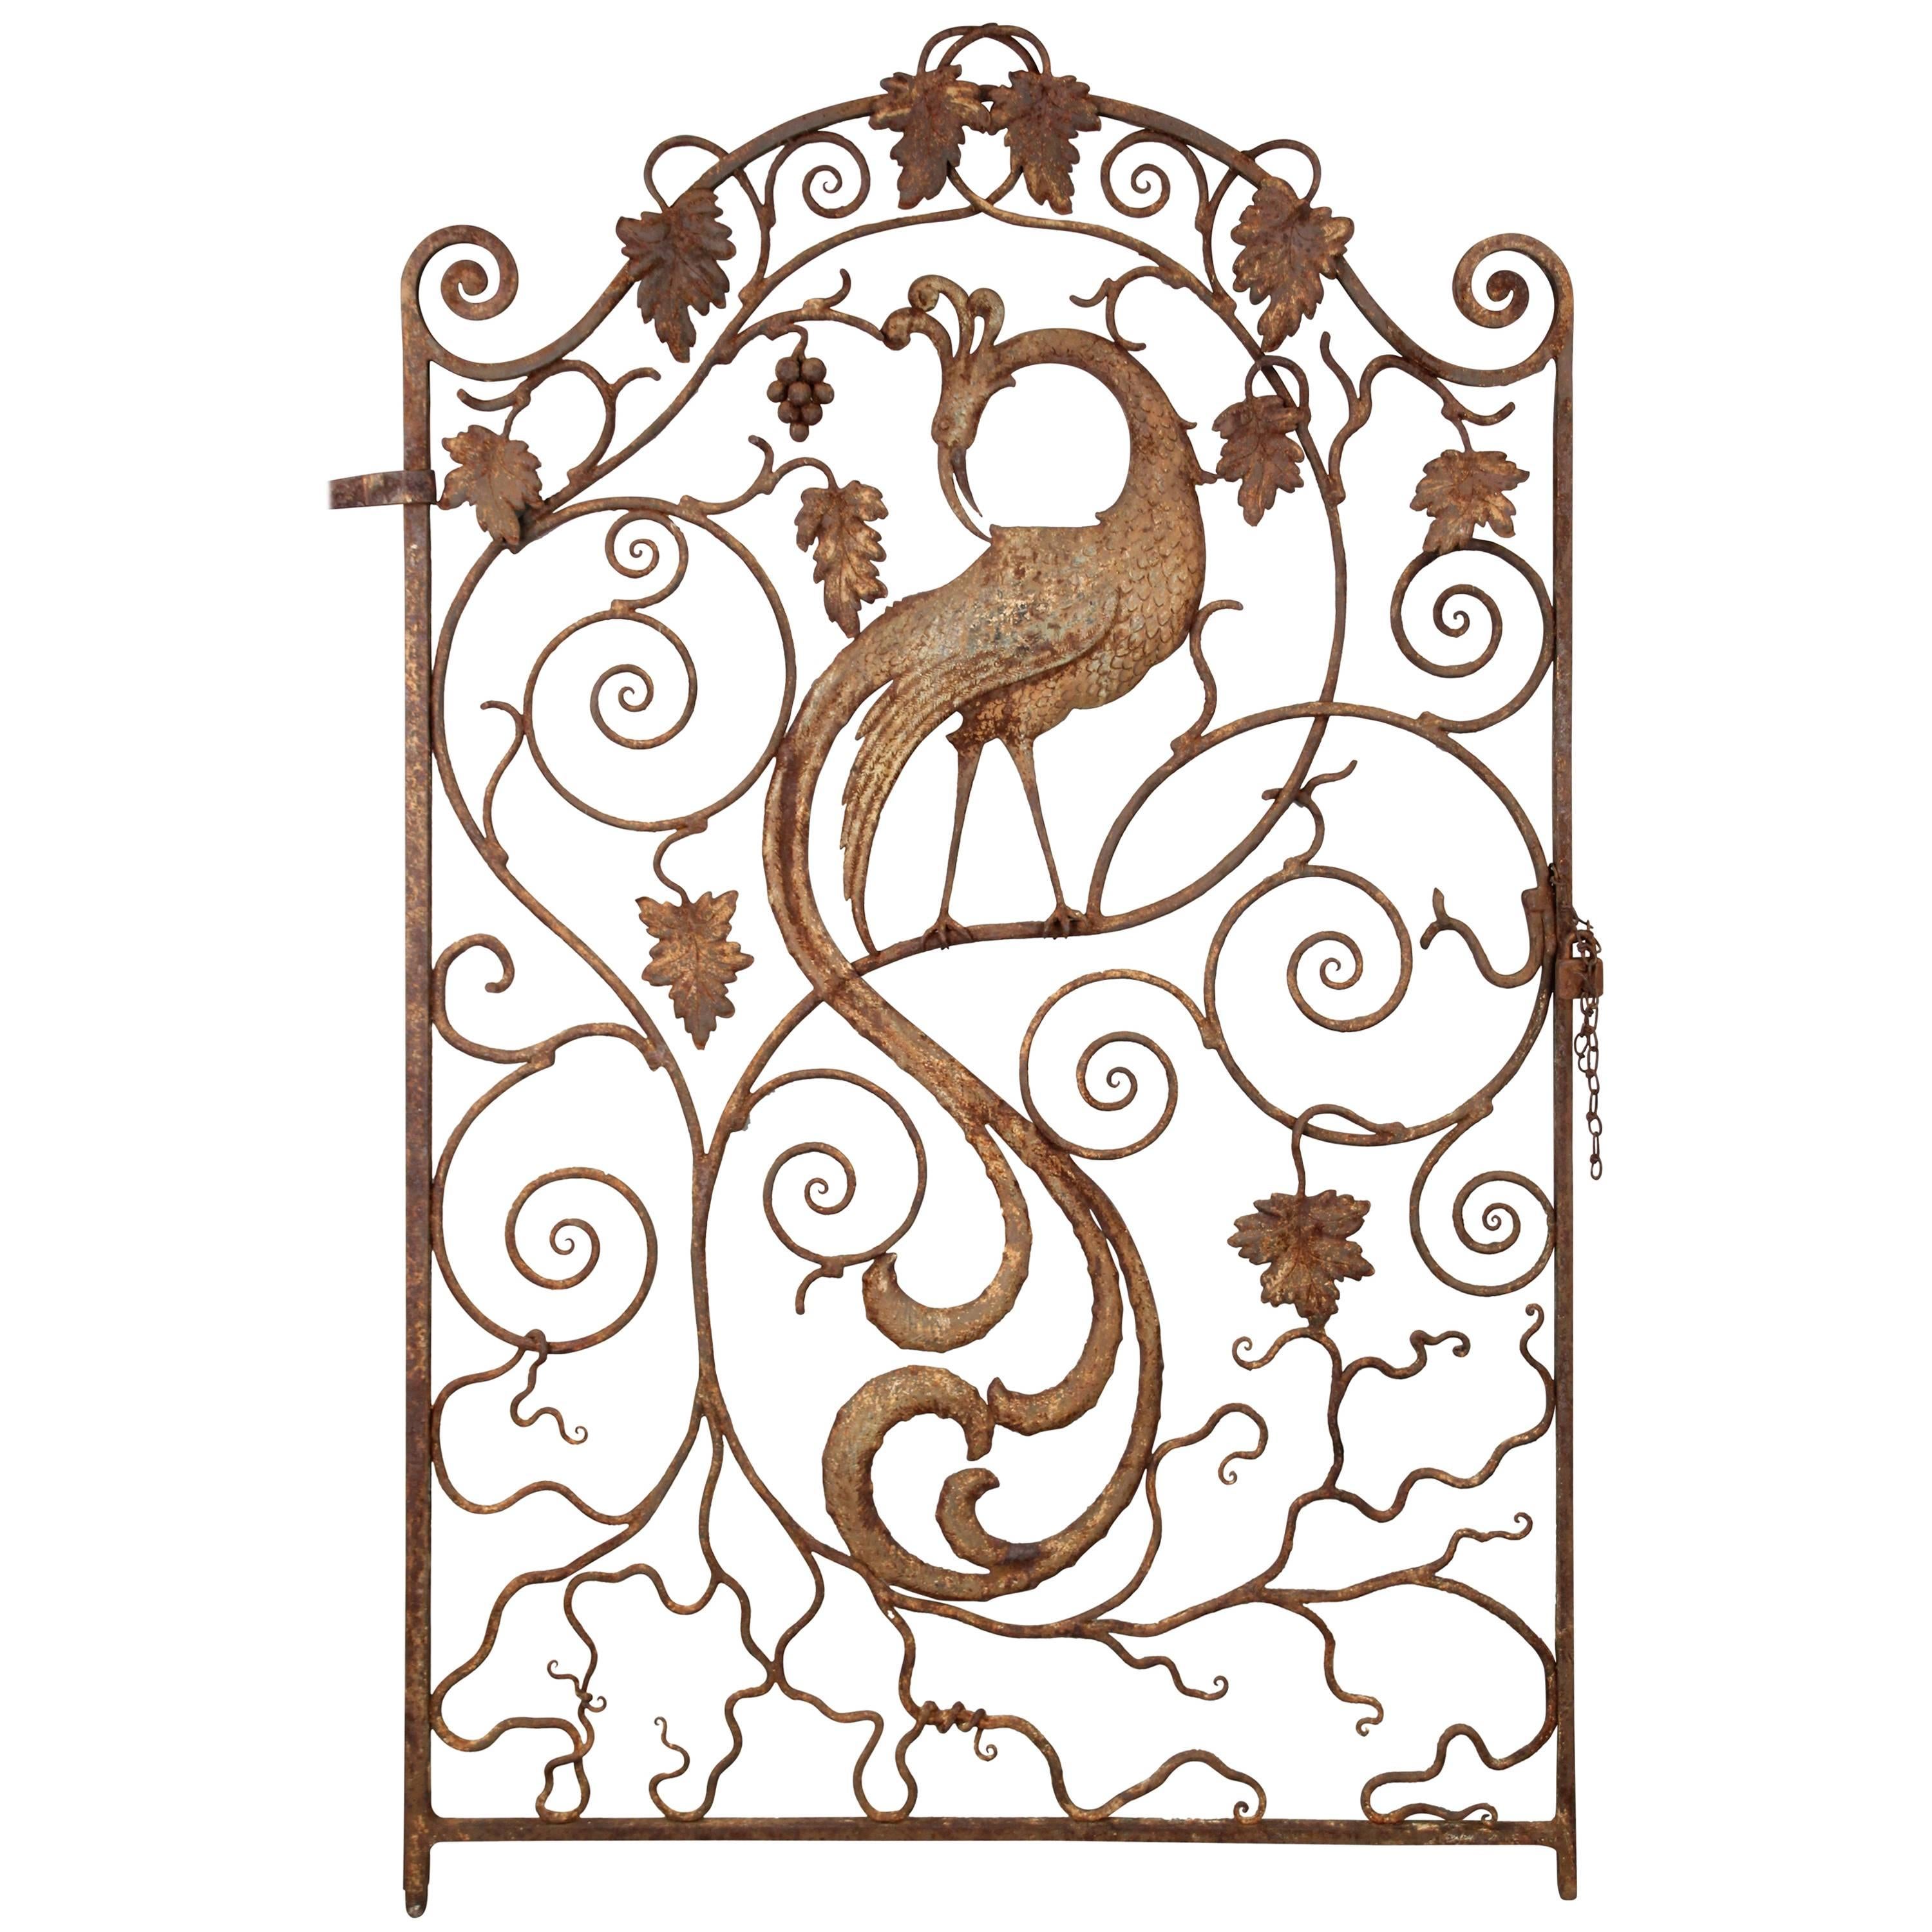 Fantastic 1920s Iron Gate with Peacock Motif